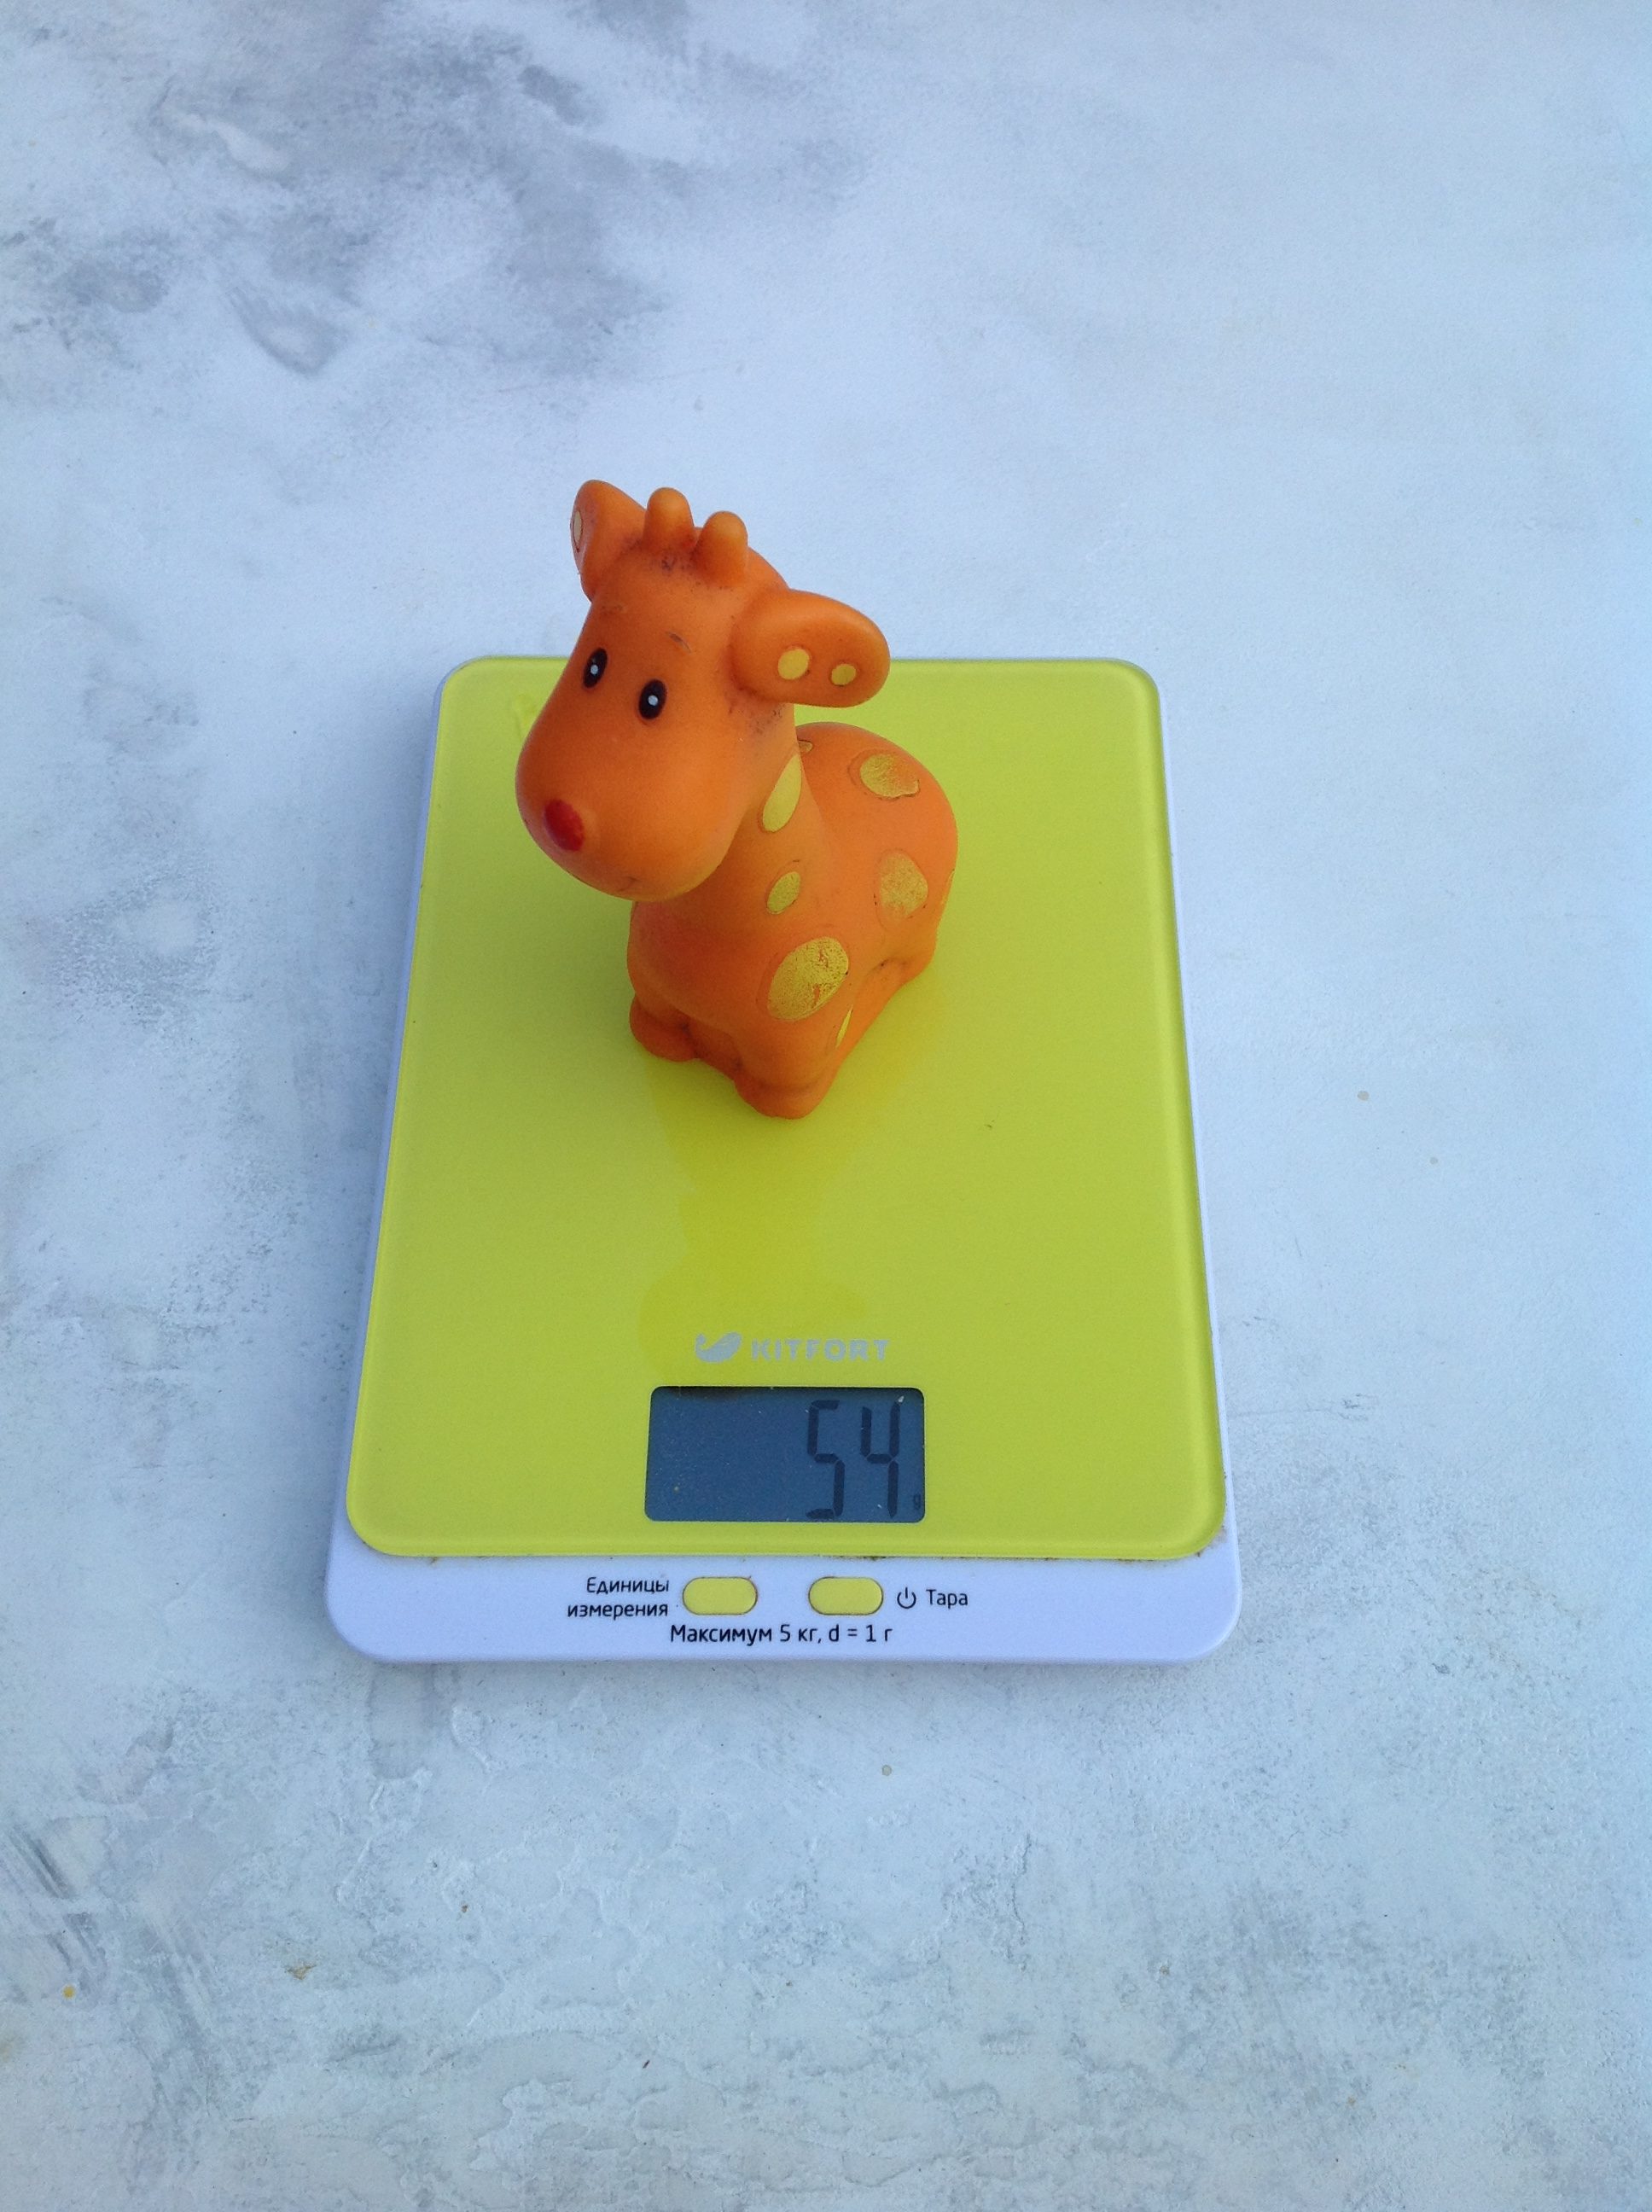 How much does a small rubber giraffe toy weigh?